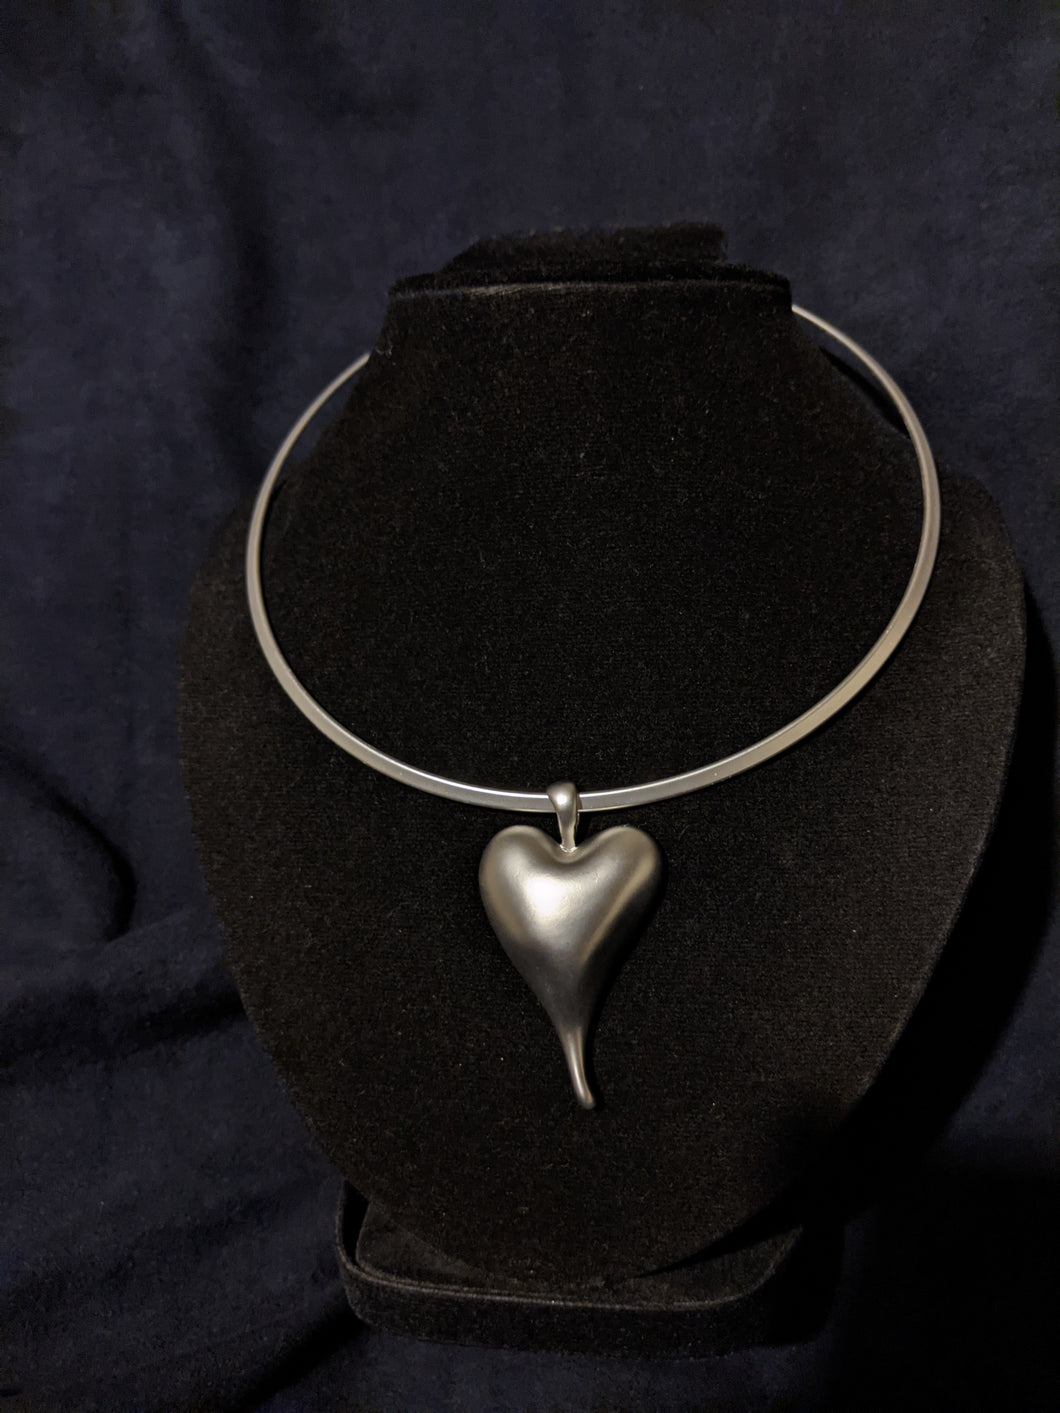 Ring Necklace with Heart Pendant